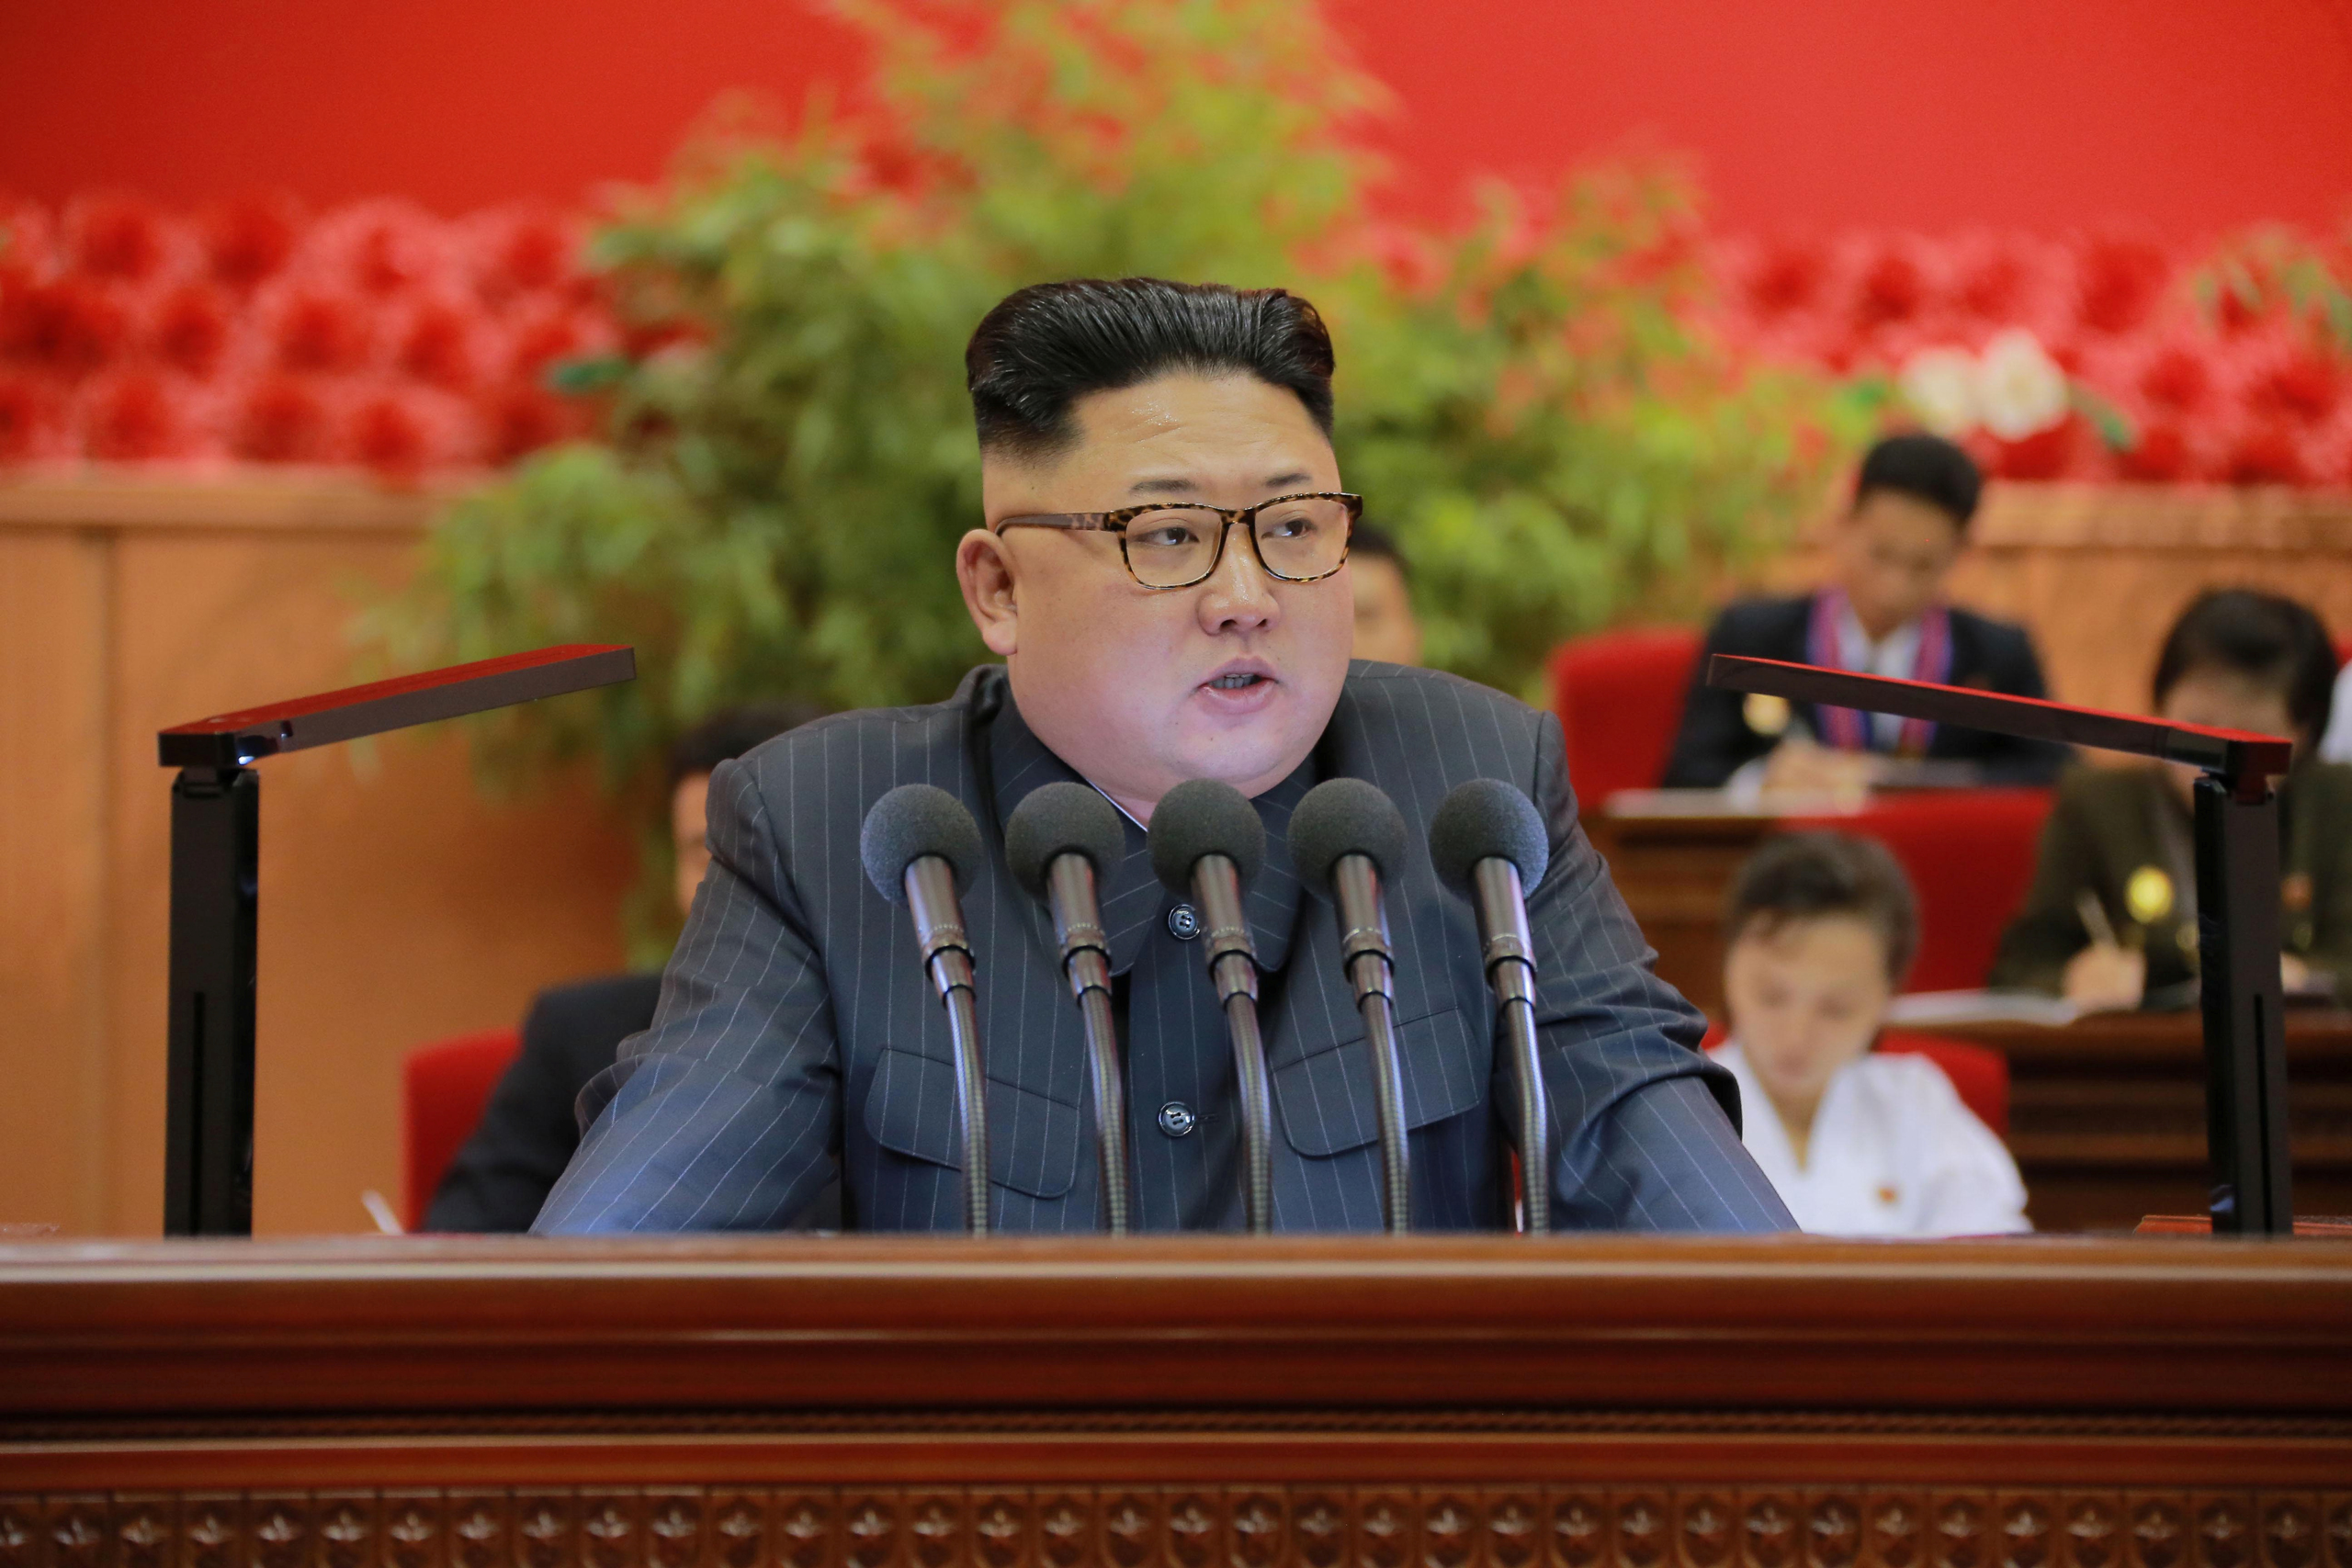 North Korean leader Kim Jong Un gives a speech at the 9th Congress of the Kim Il Sung Socialist Youth League in this undated photo released by North Korea's Korean Central News Agency (KCNA) in Pyongyang